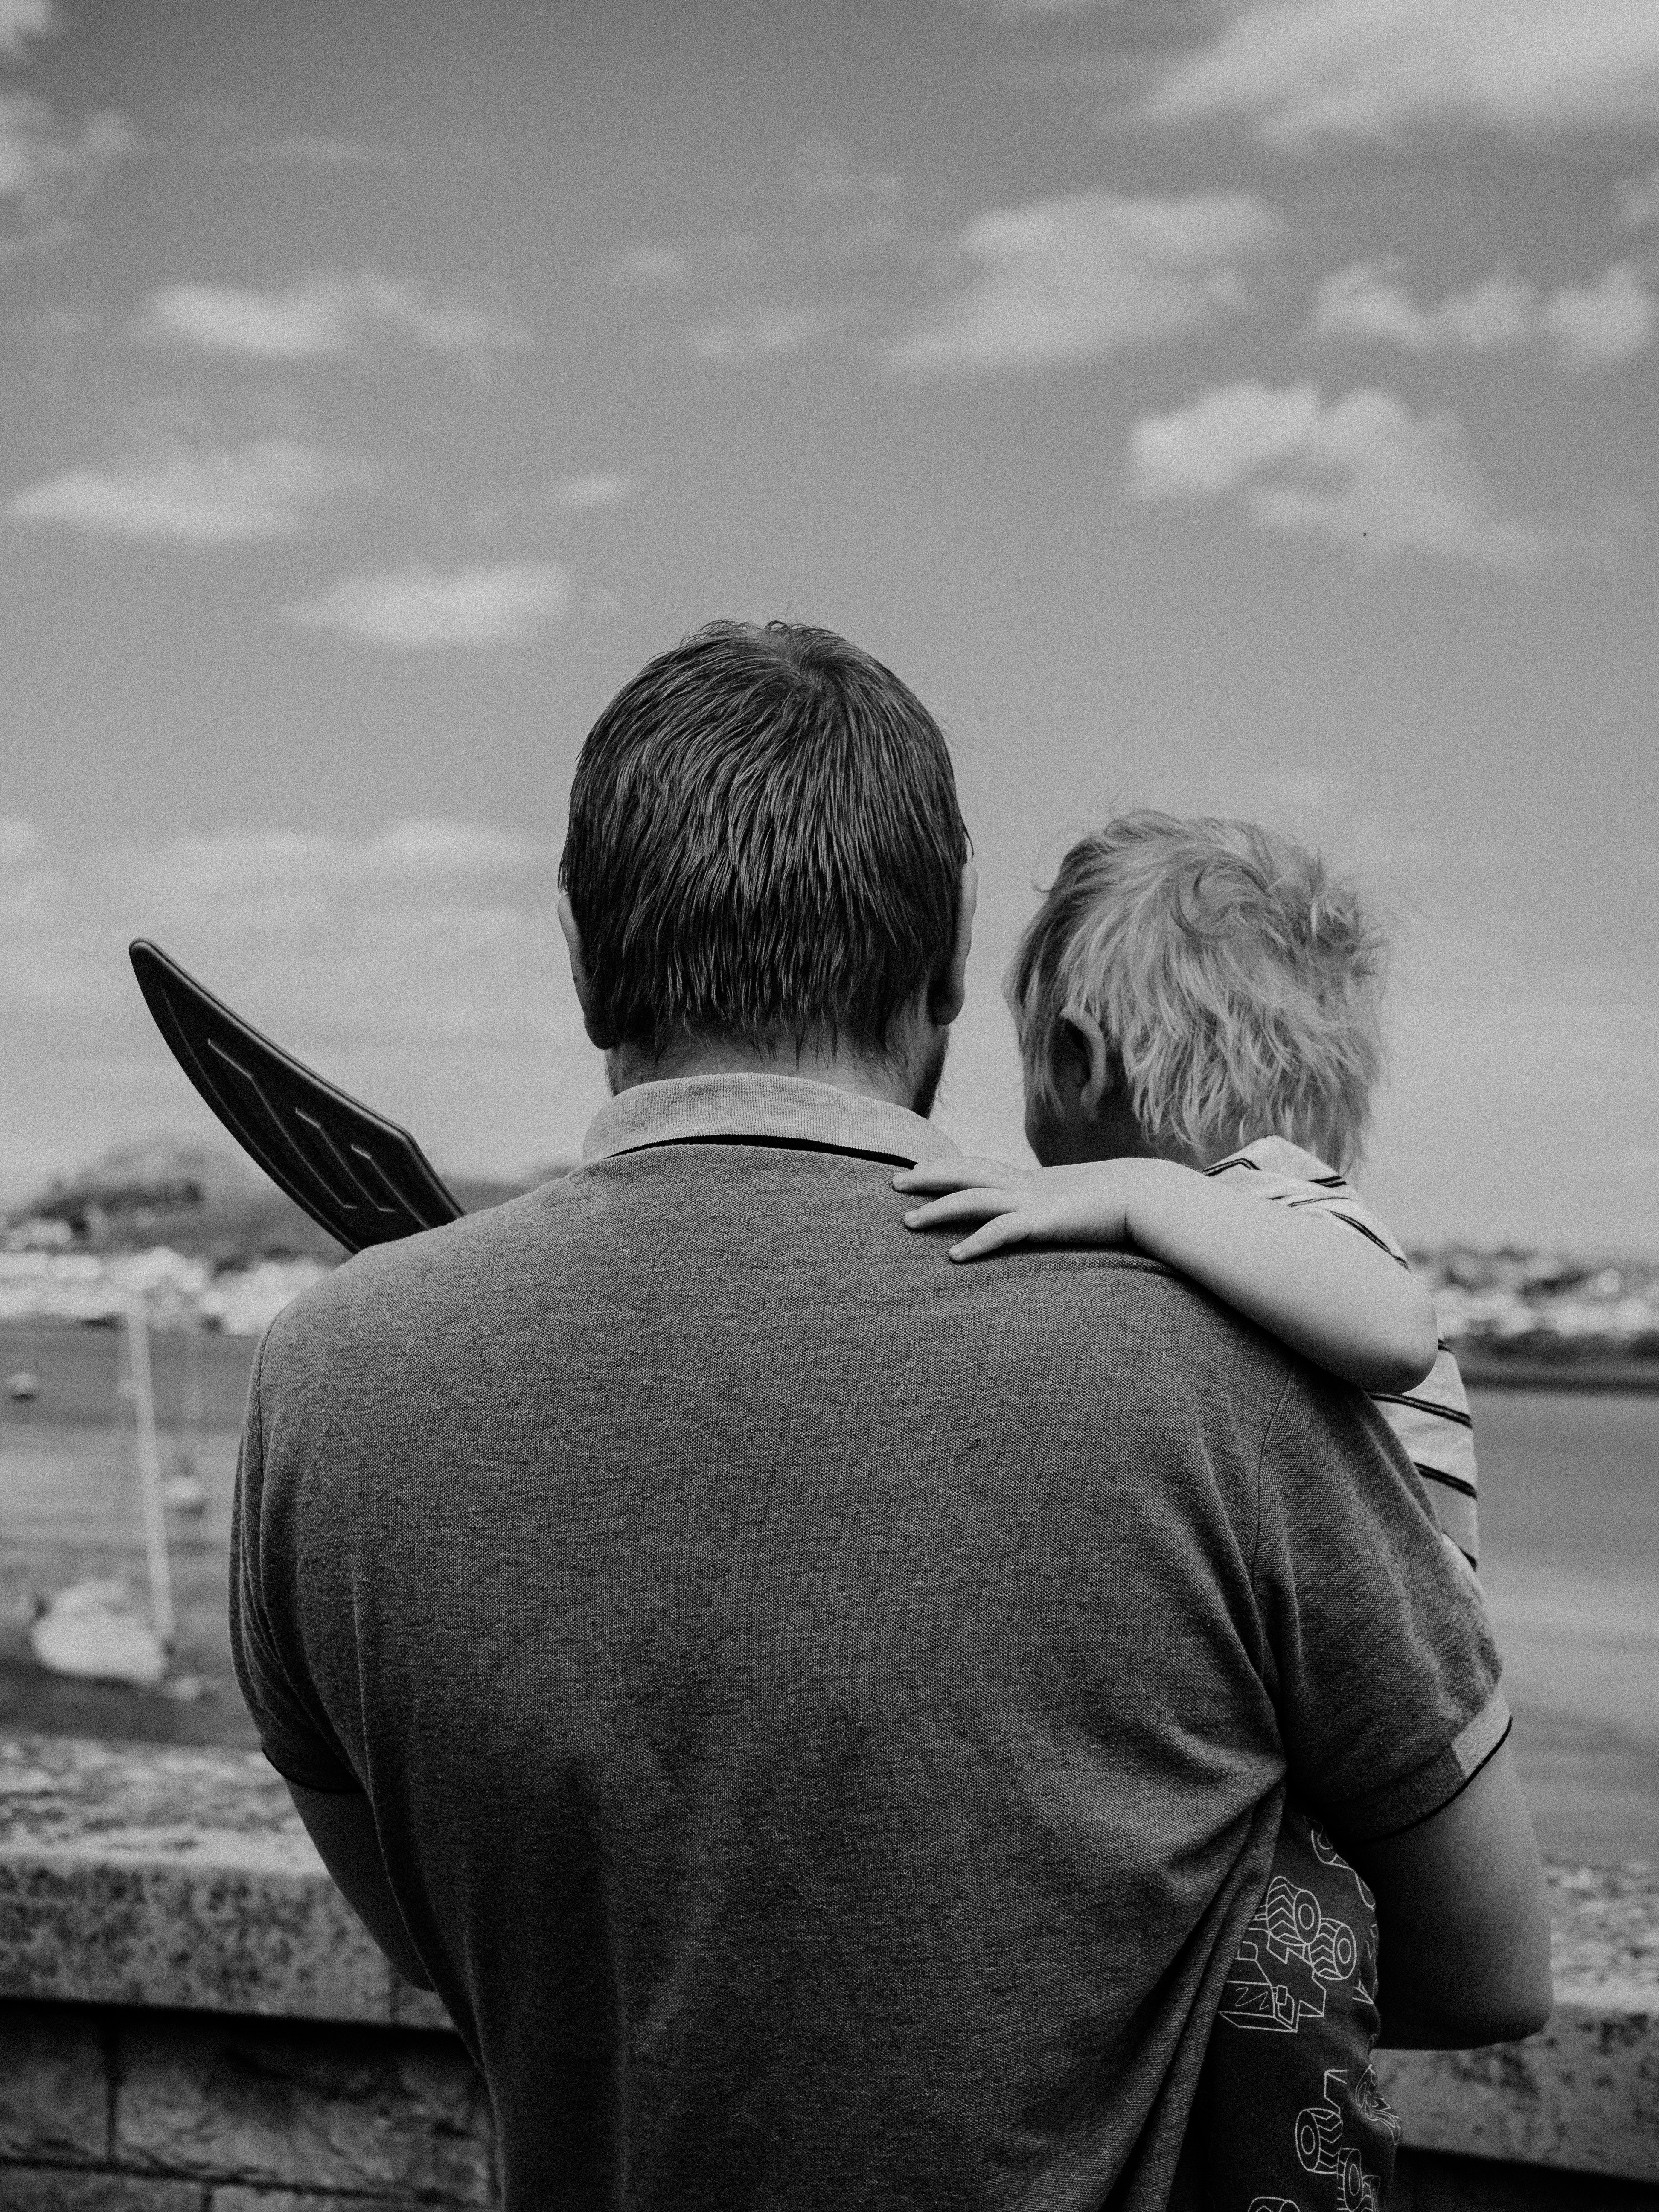 Man holding child in his arms | Source: Pexels